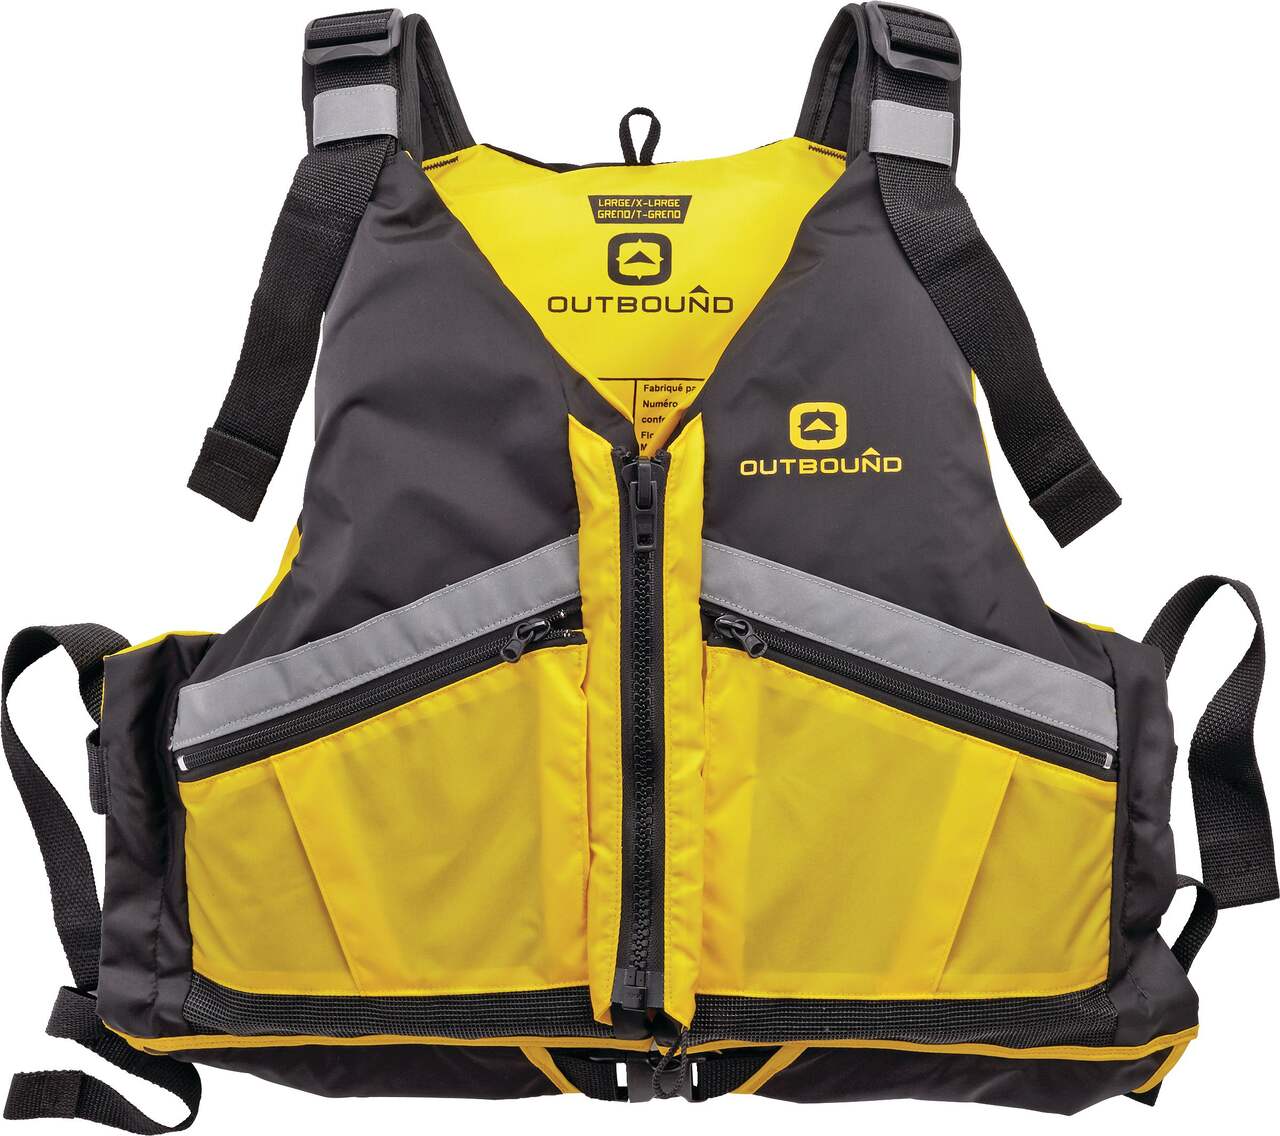 Outbound Adult 4-Buckle PFD/Life Jacket, Assorted Sizes